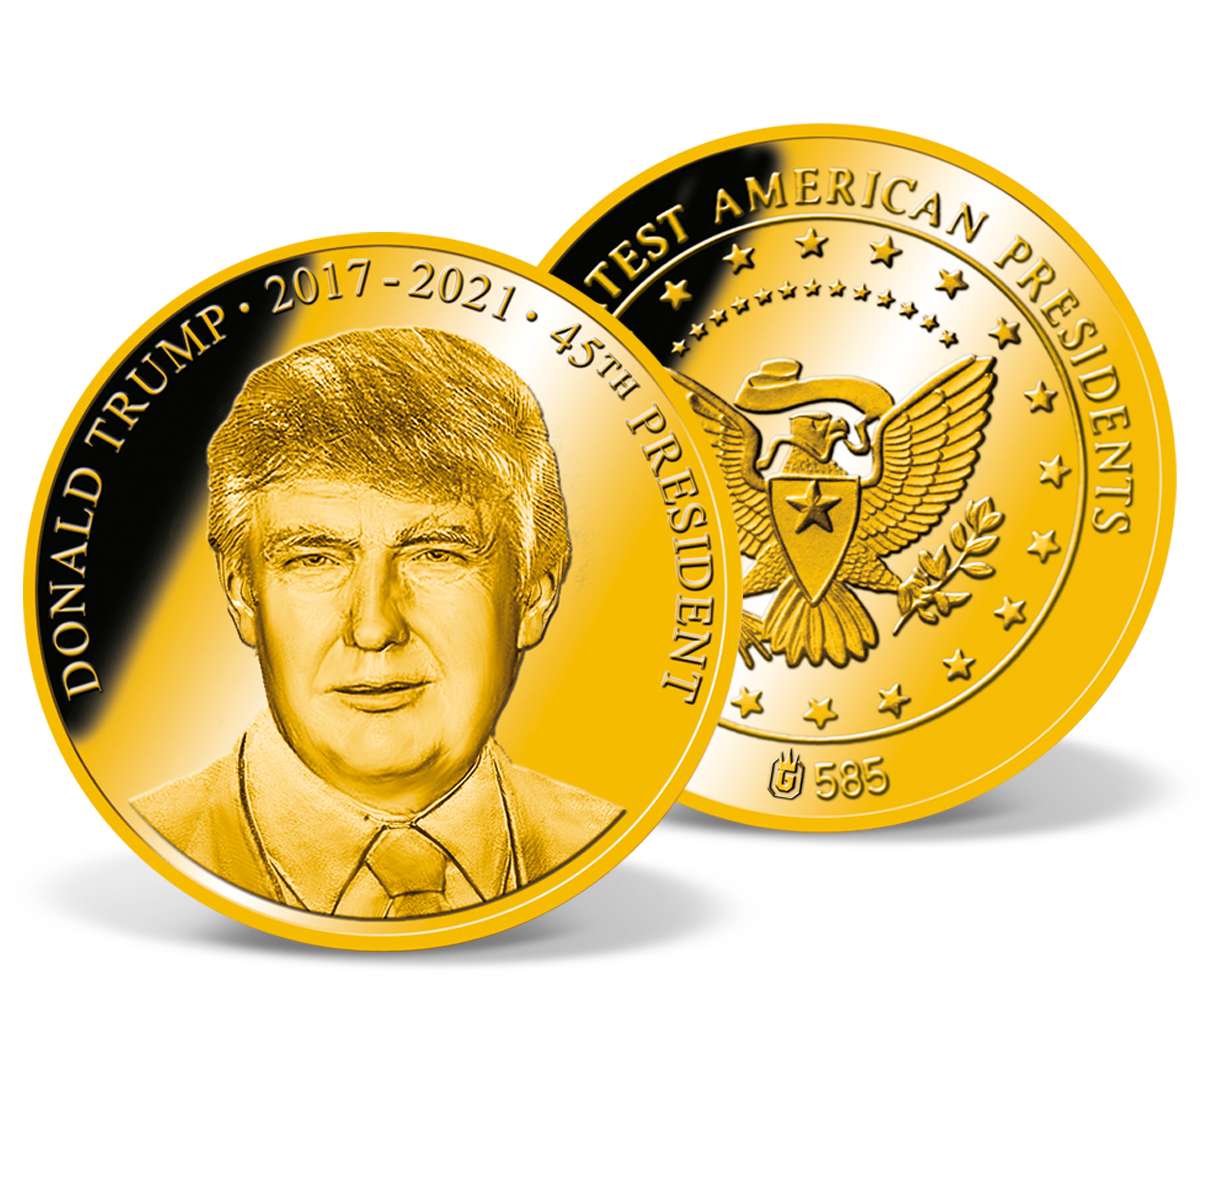 President Donald Trump Commemorative Gold Coin | Solid Gold | Gold | American Mint1212 x 1200